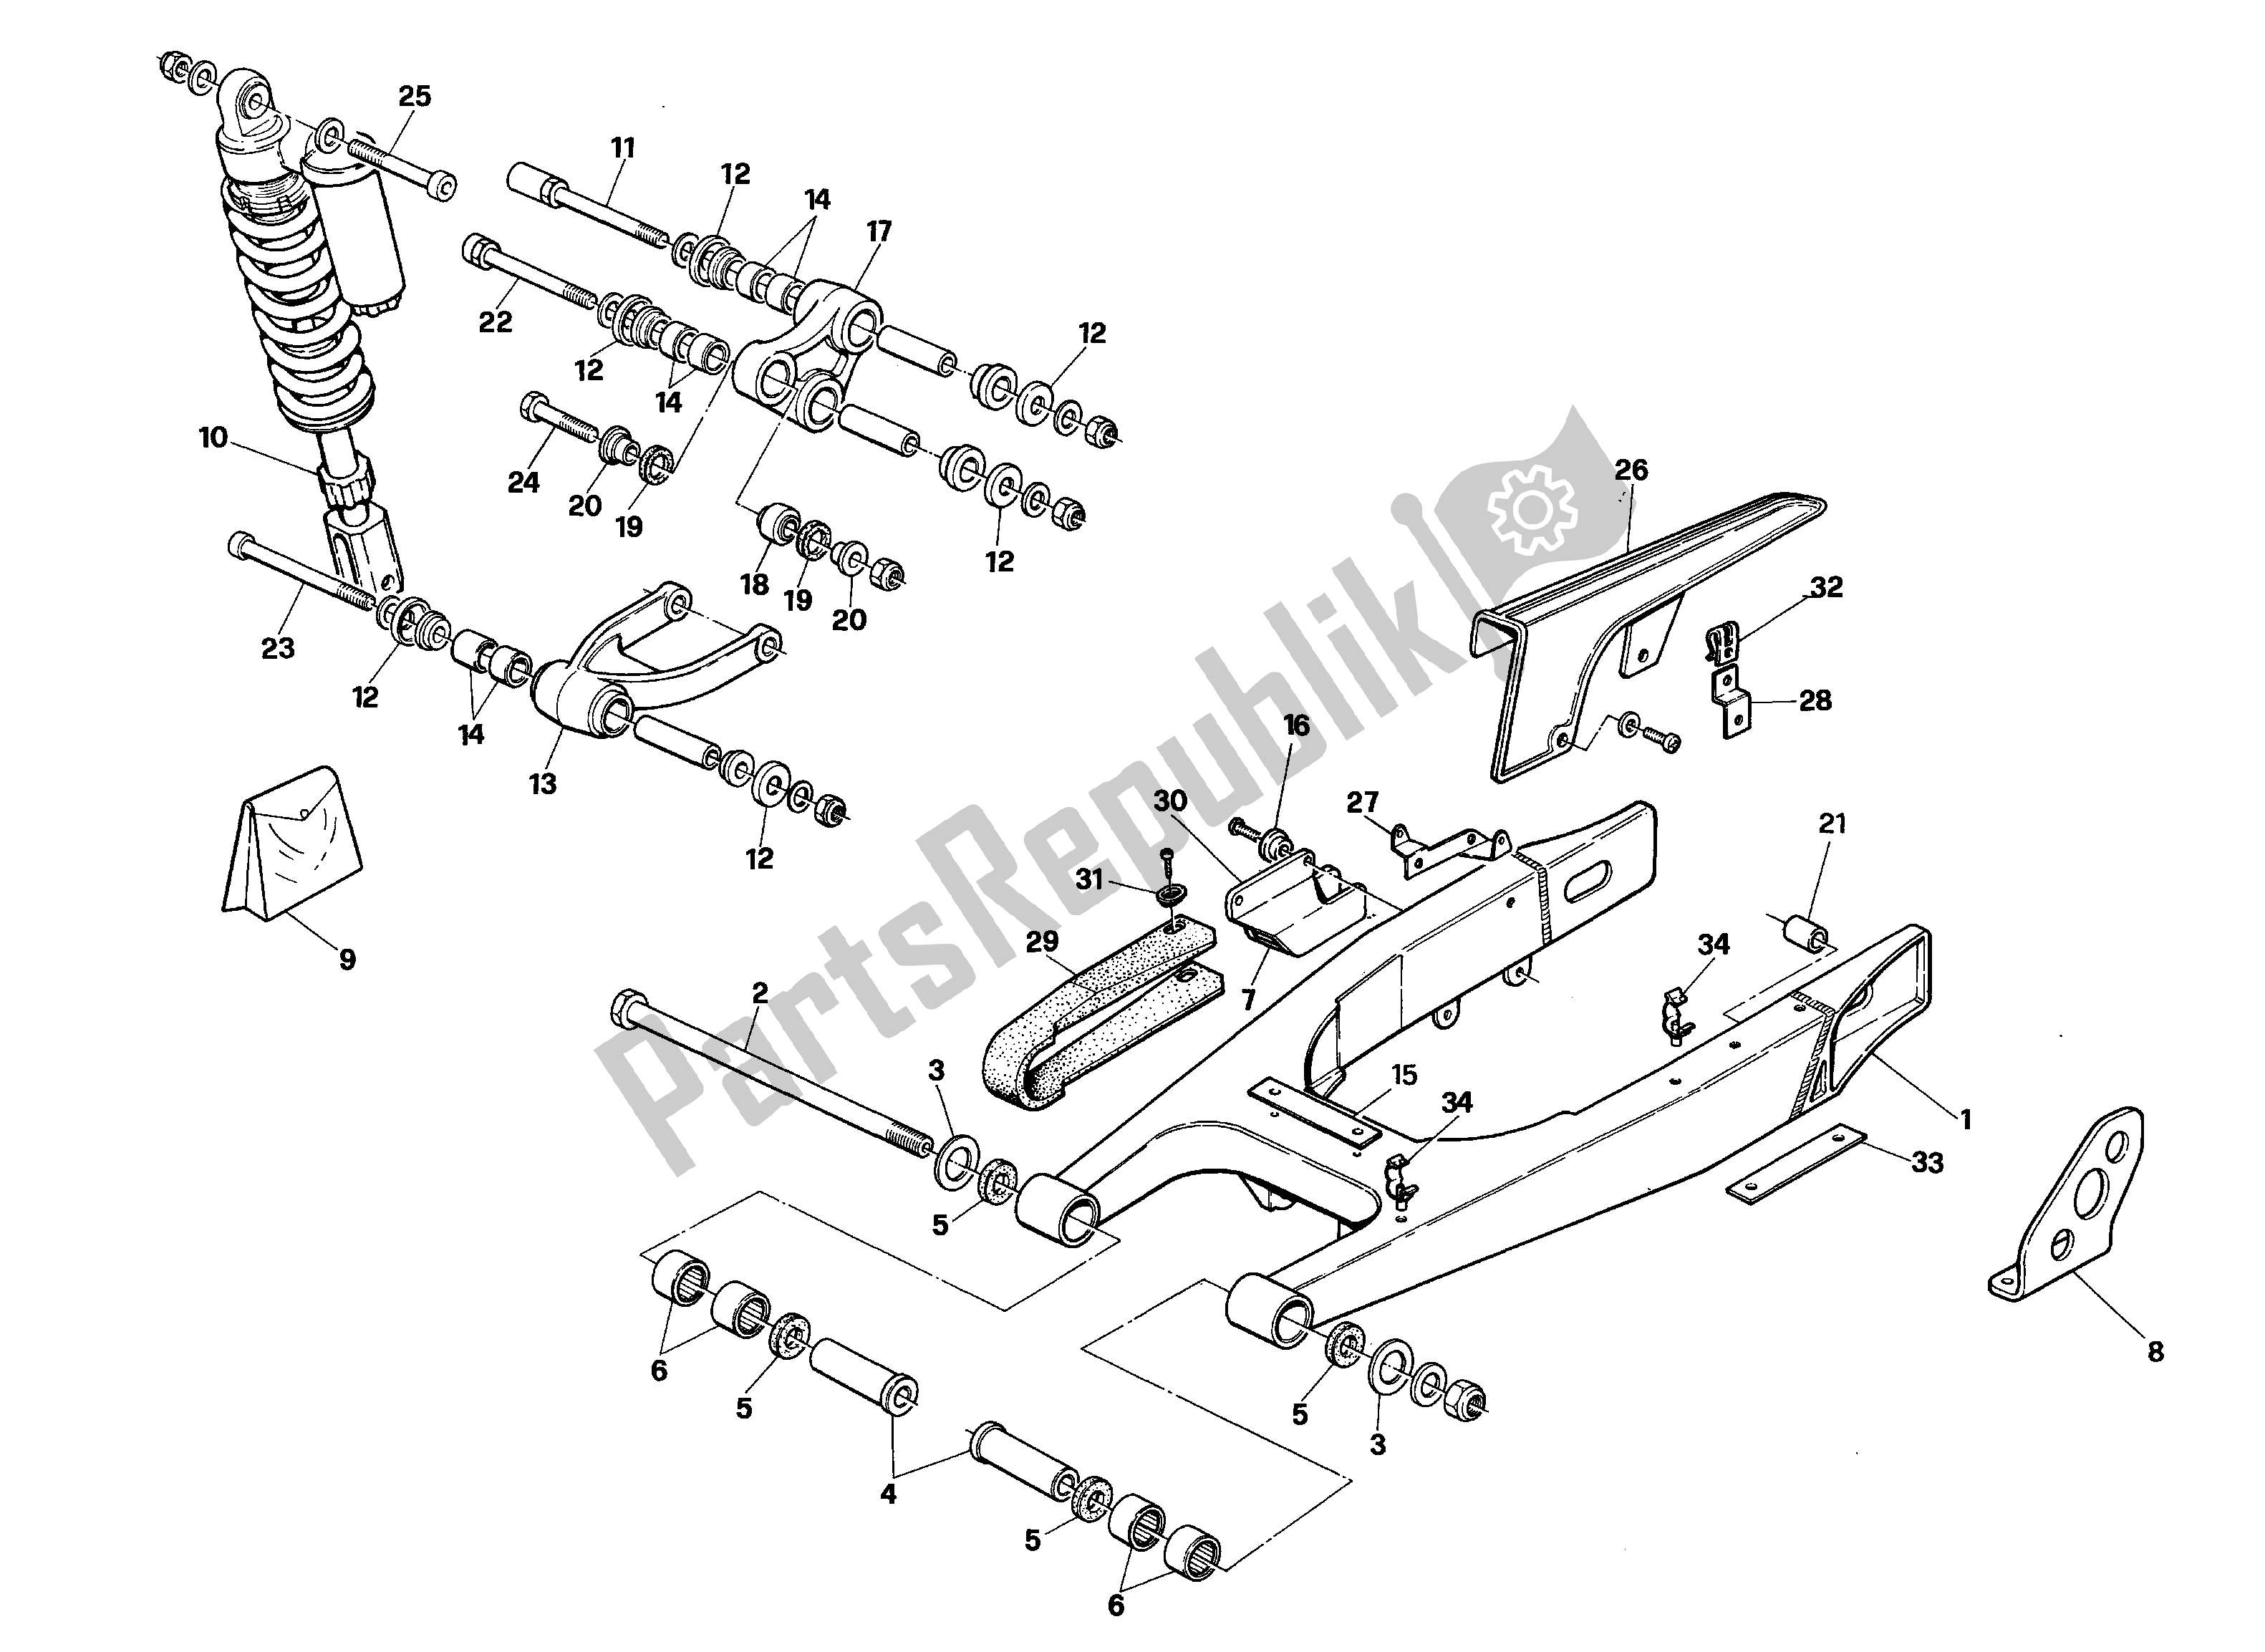 All parts for the Rear Fork And Suspension of the Aprilia RX 125 1989 - 1993